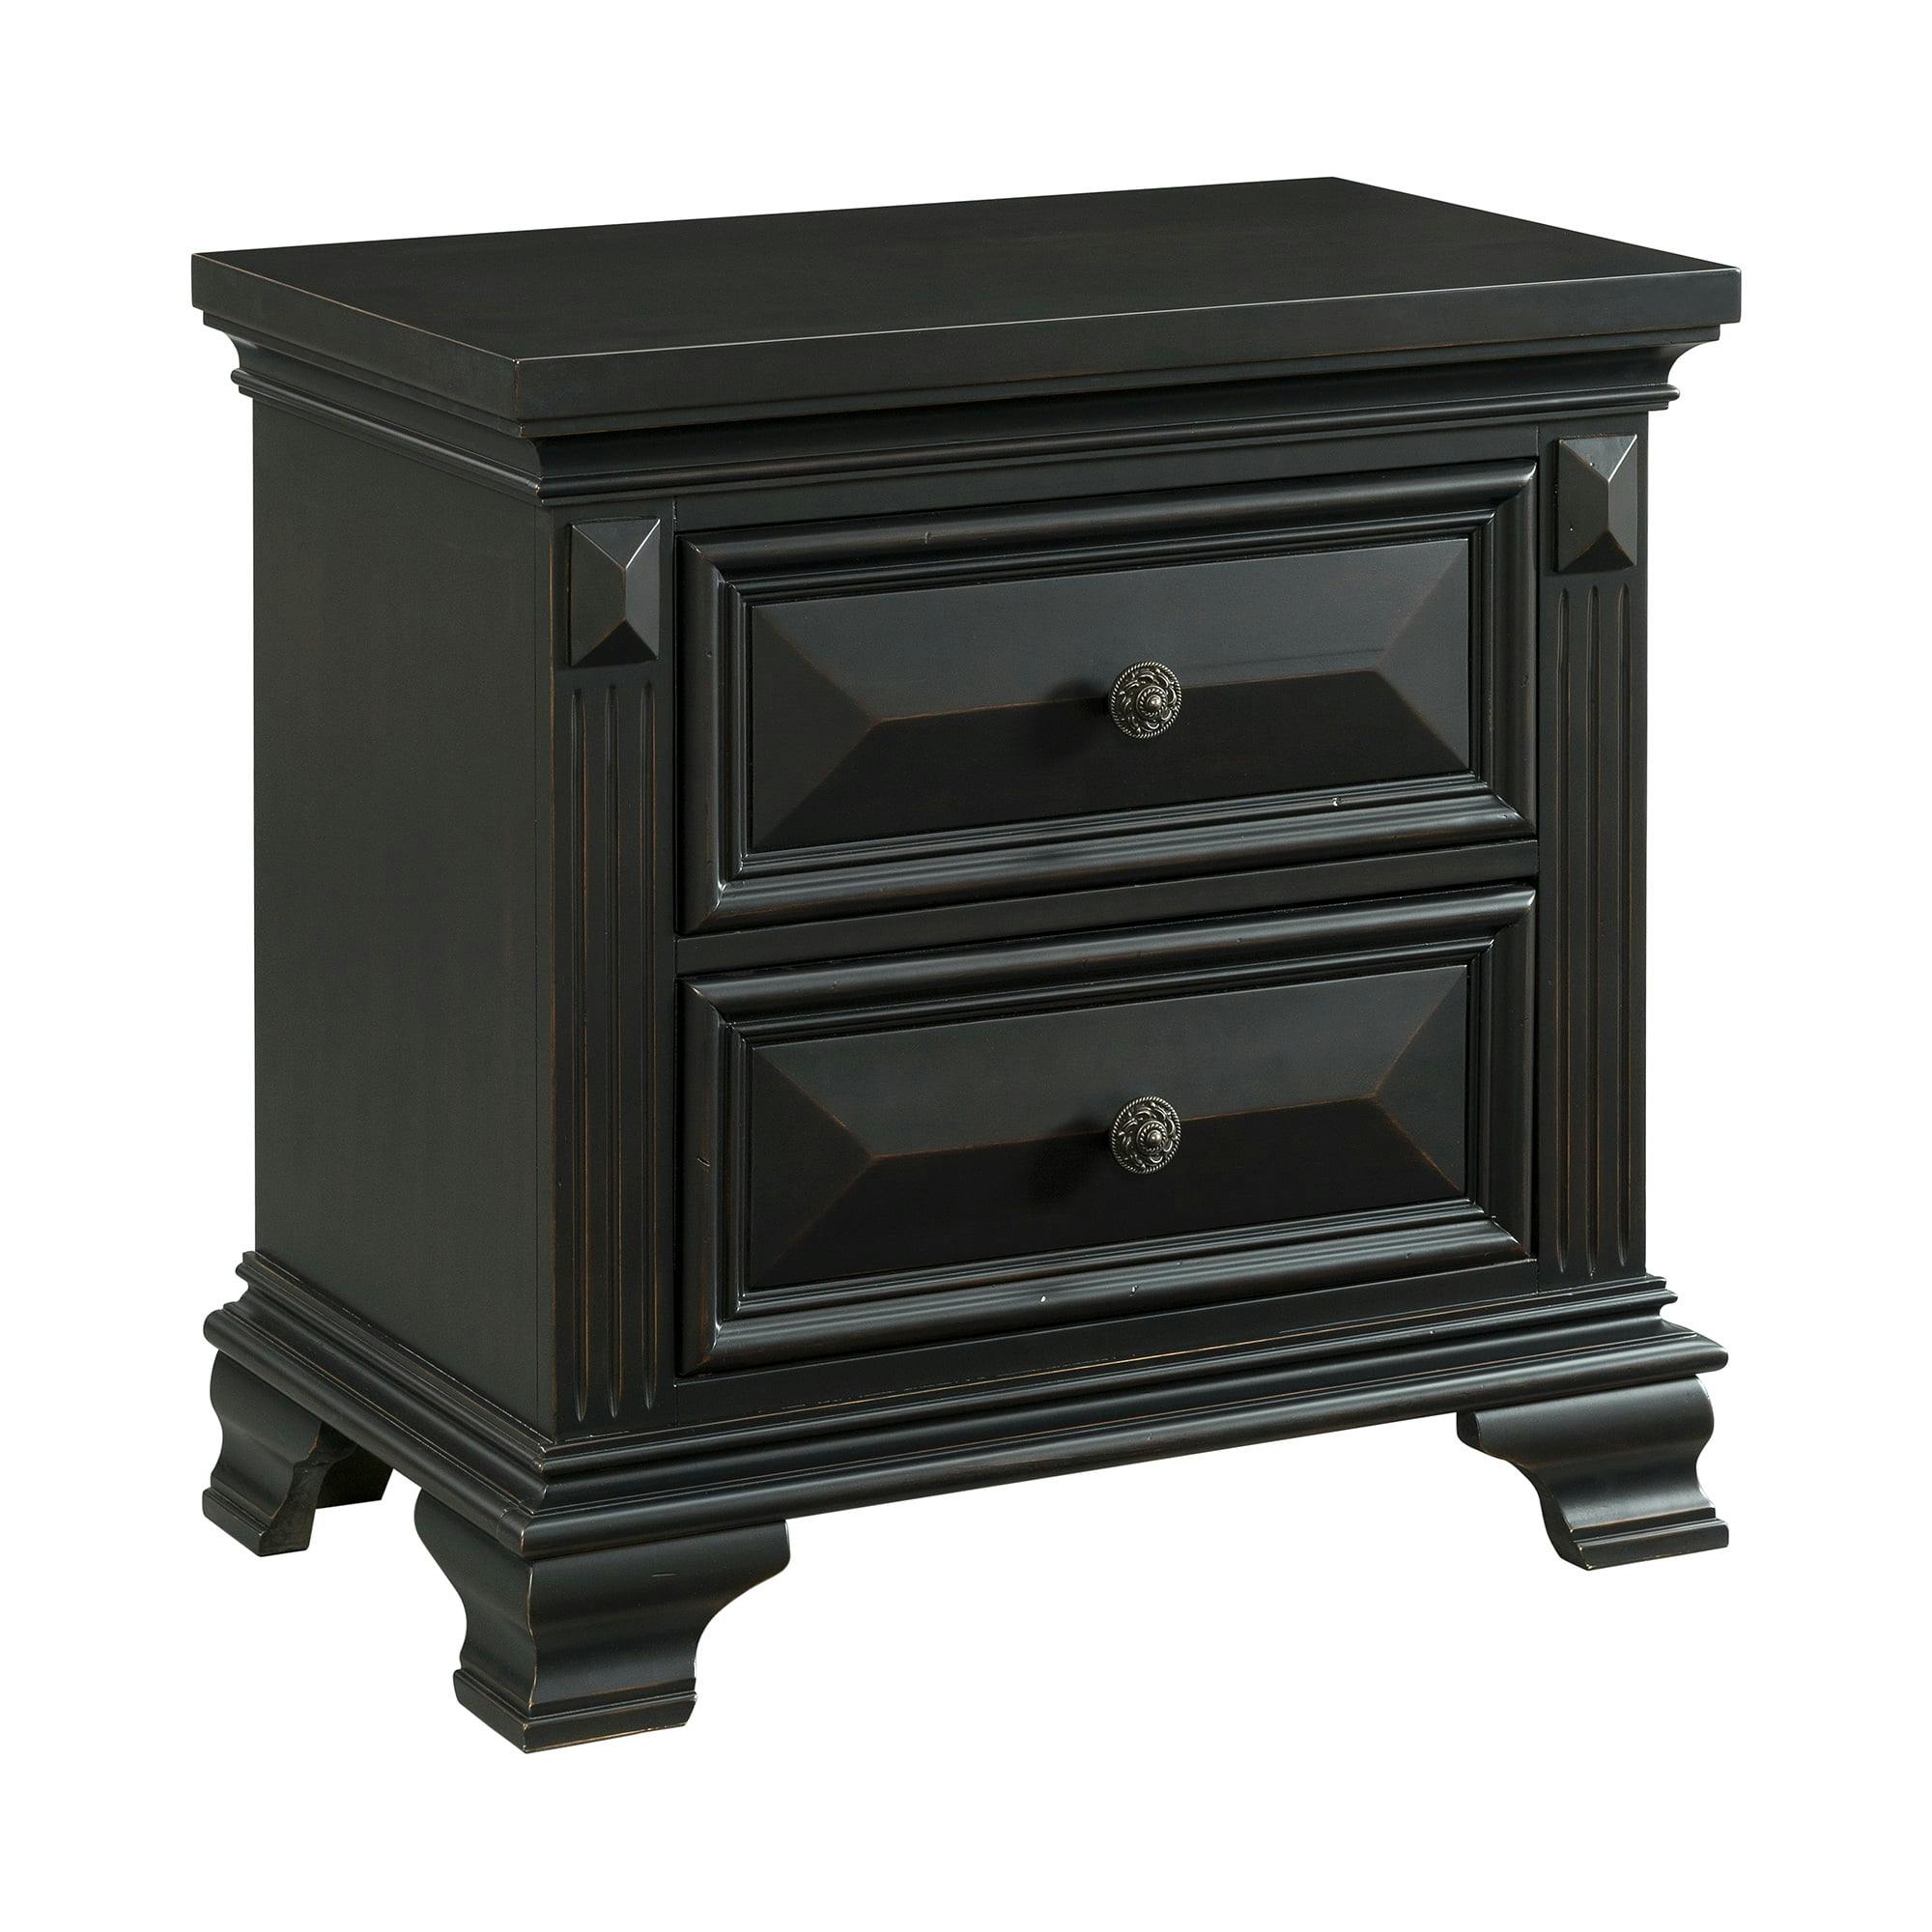 Transitional Antique Black 2-Drawer Nightstand with Beveled Edges